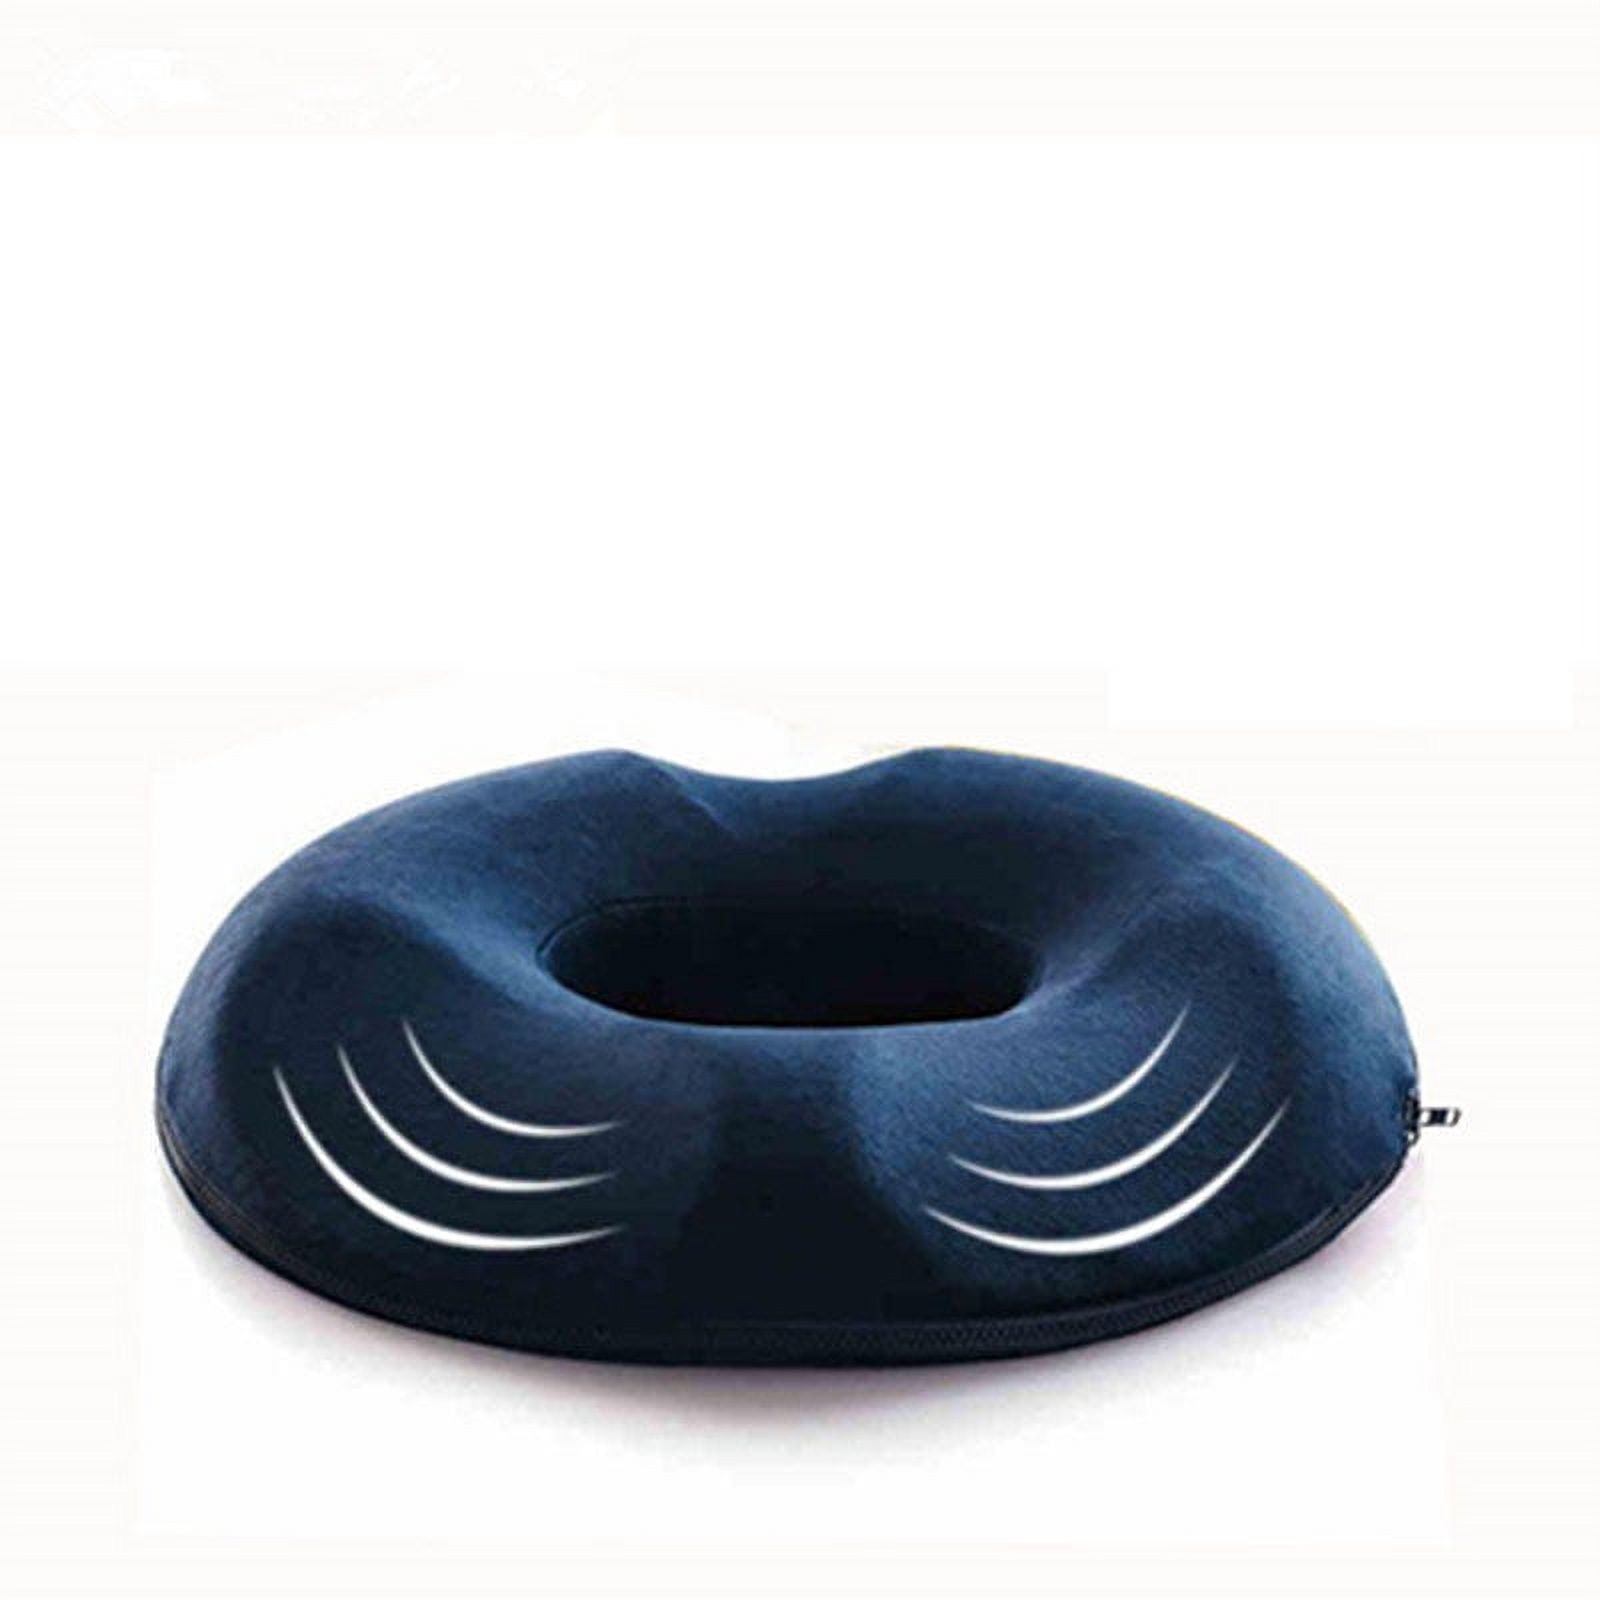 Donut Cushion Memory Foam Medical Ring Seat Pain Relief Orthopedic Pillow  Coccyx